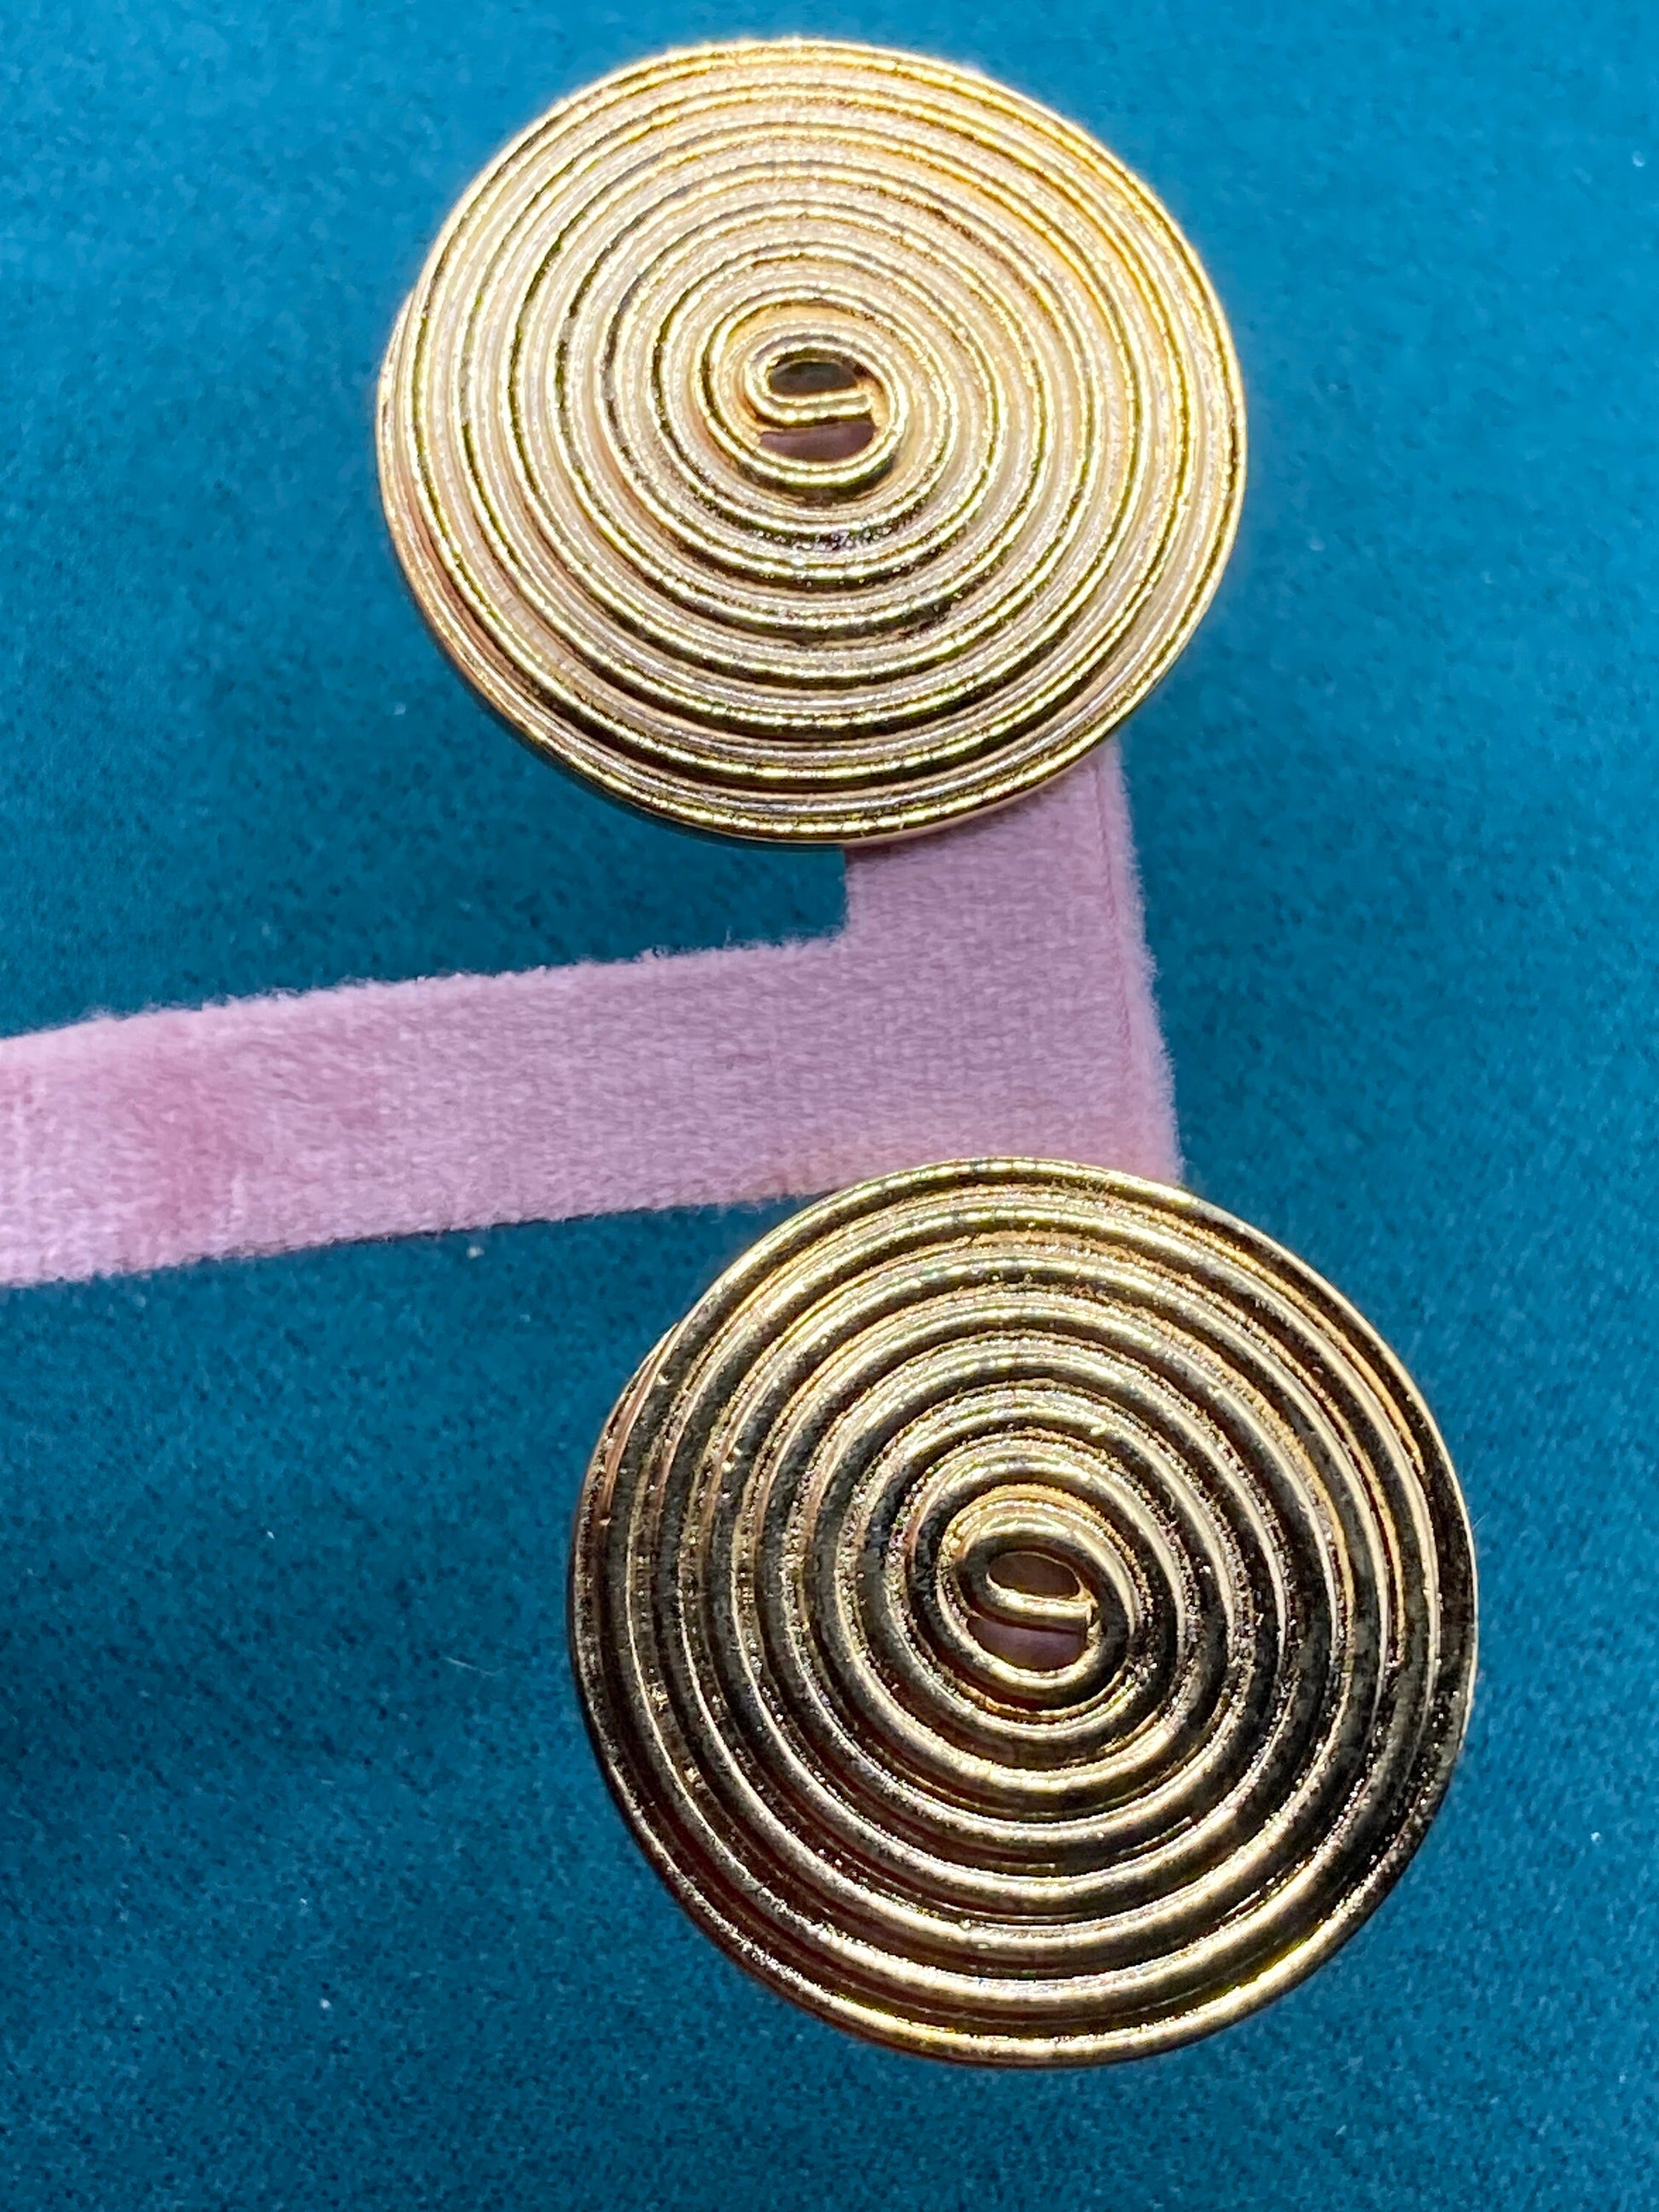 True vintage pristine oversized gold plated Etruscan 4.75cm round disc button earrings genuine period old shop stock